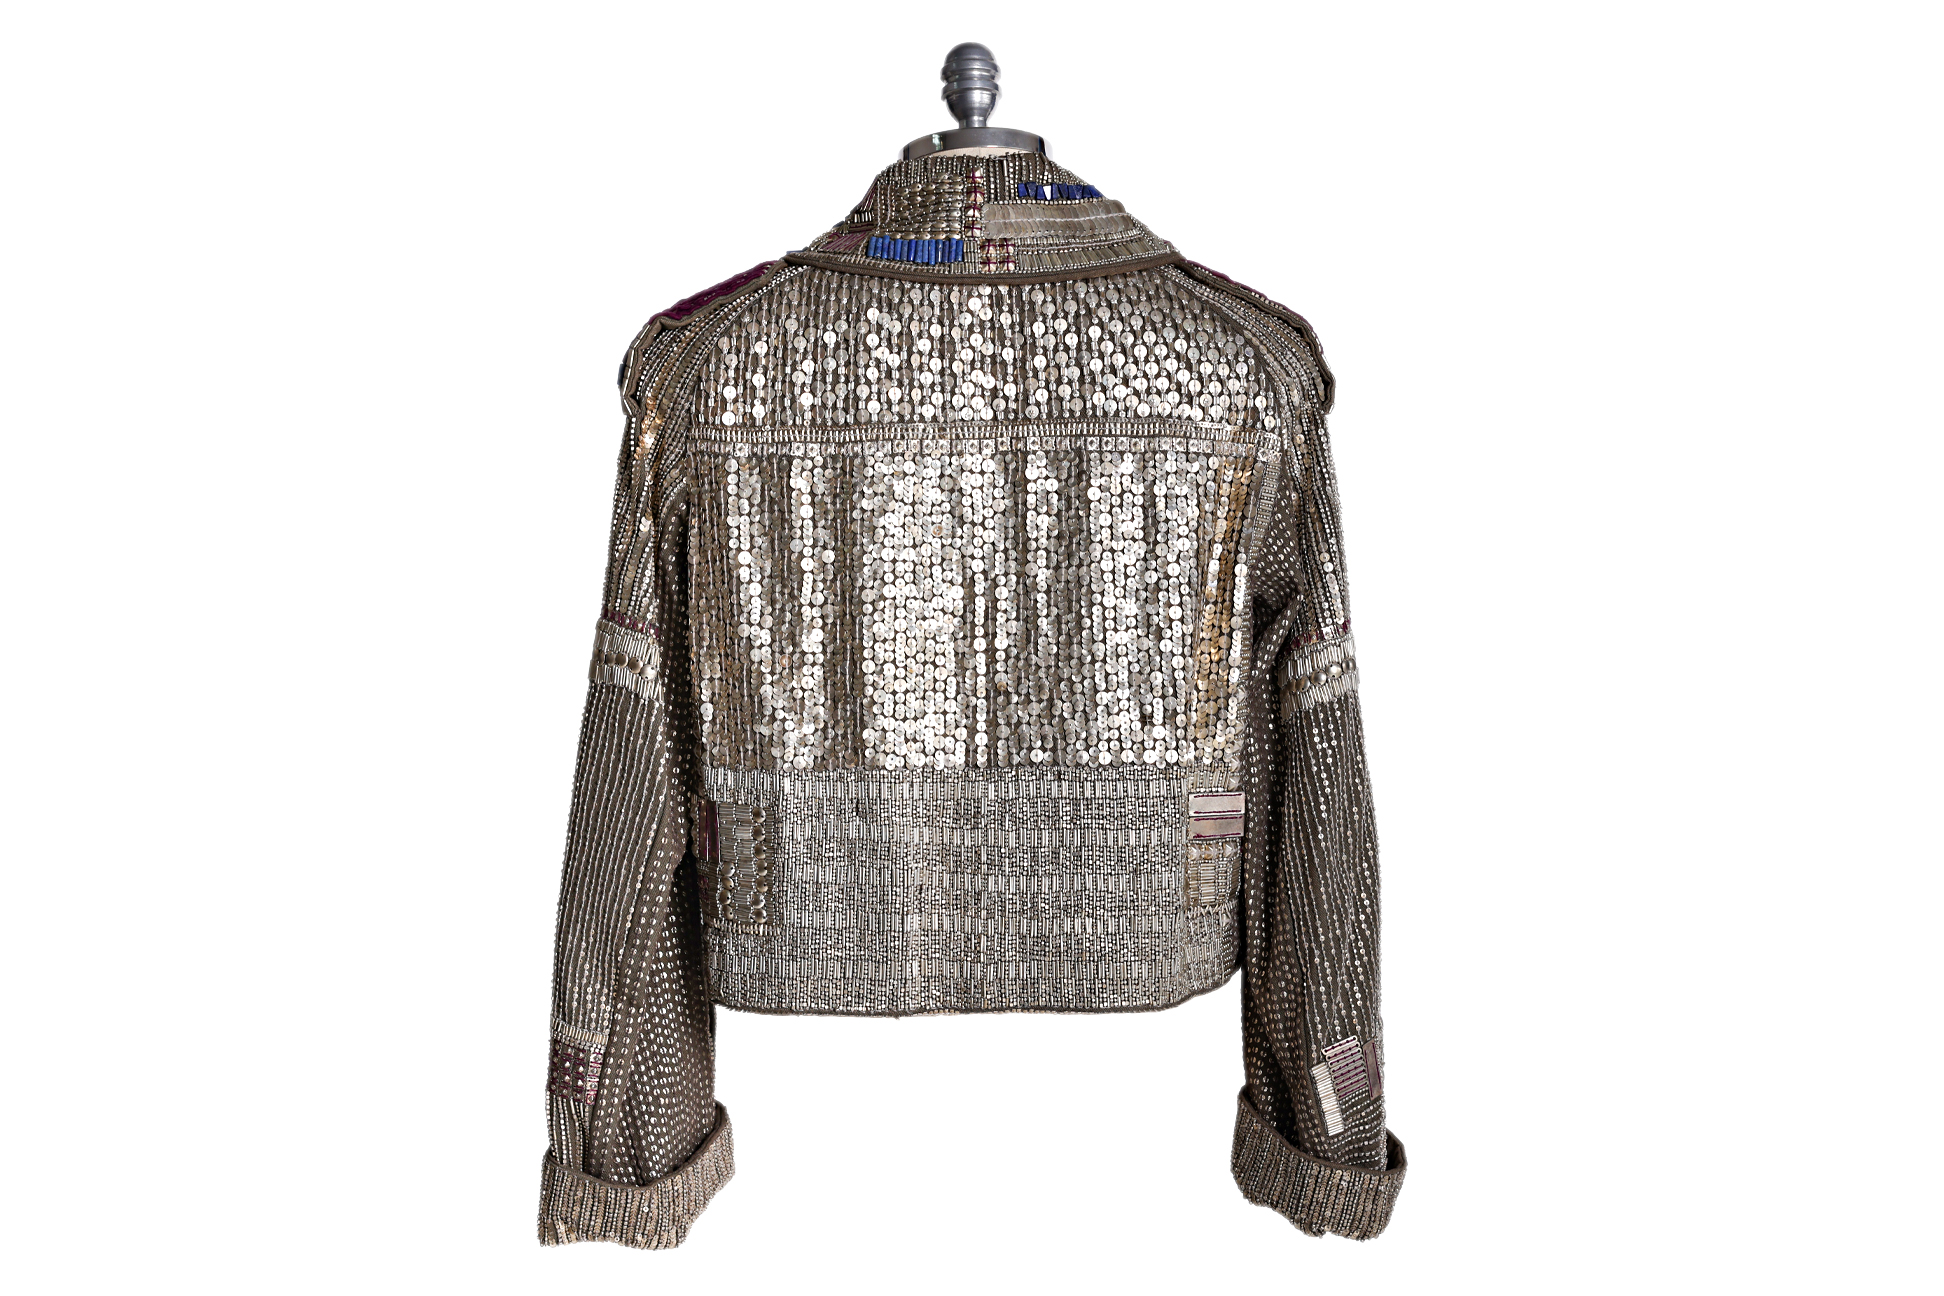 A DRIES VAN NOTEN EMBELLISHED MILITARY JACKET - Image 2 of 13